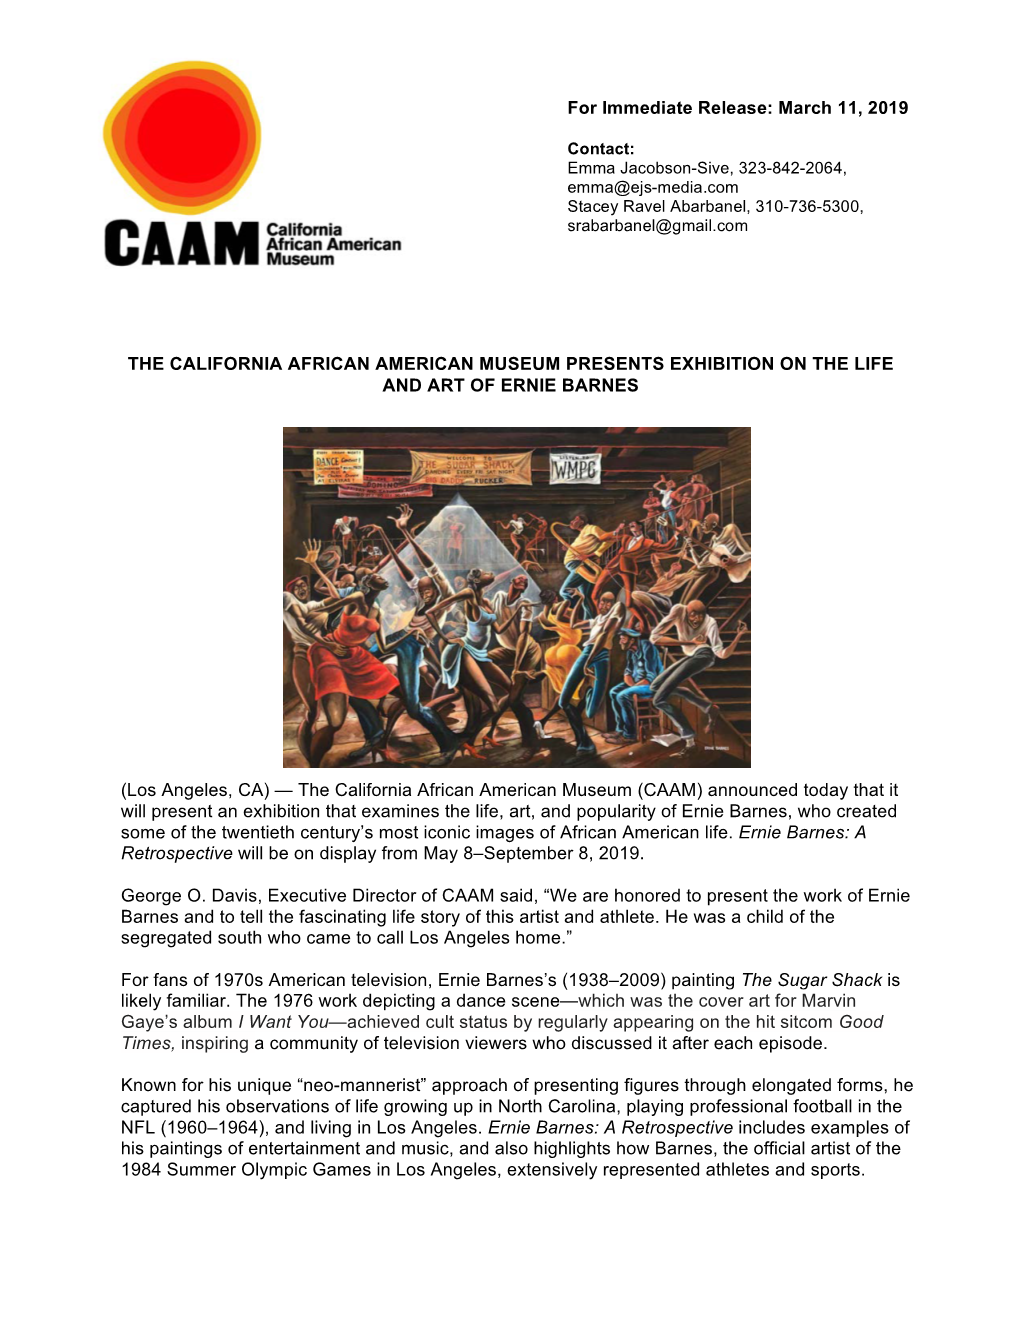 The California African American Museum Presents Exhibition on the Life and Art of Ernie Barnes